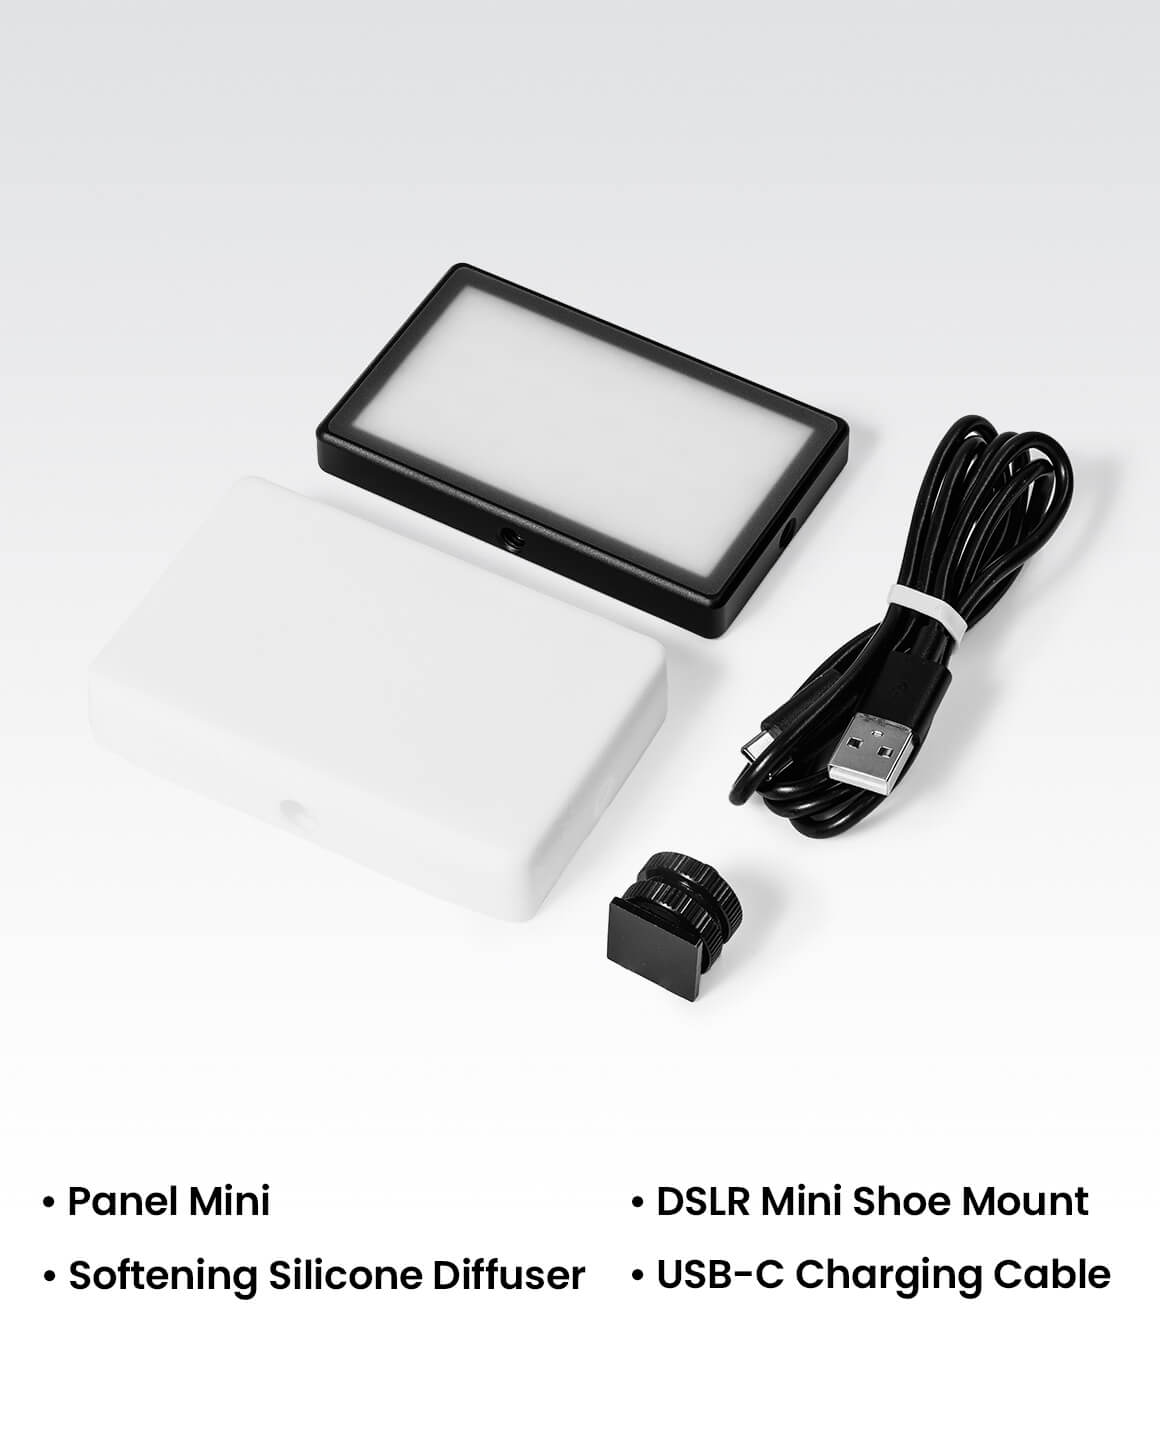 An array of accessories included with the Panel Mini